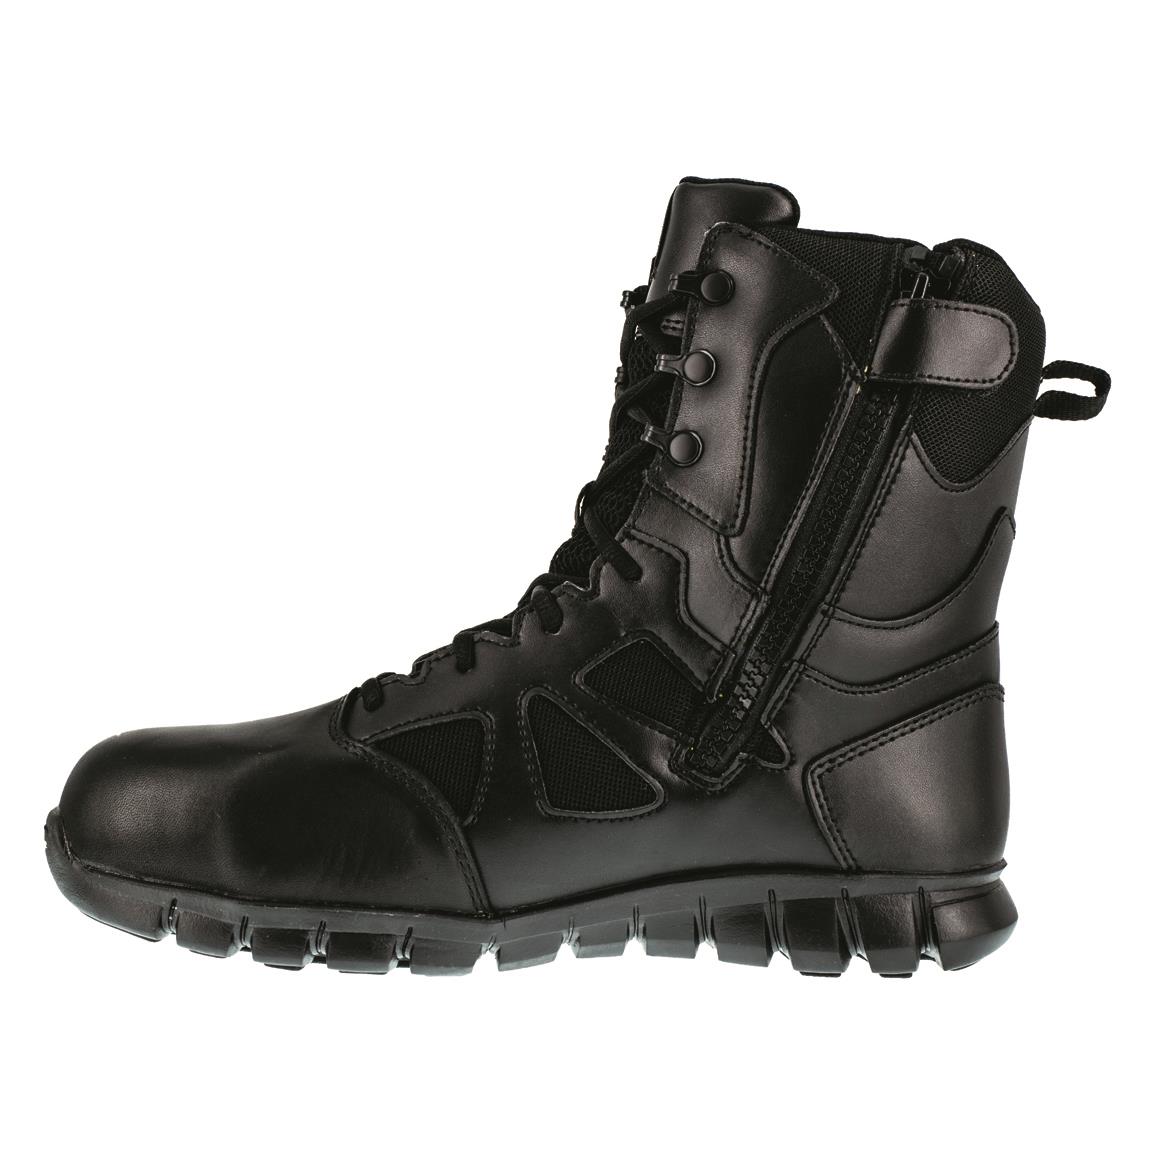 Extra Wide Military Boots | Sportsman's Guide